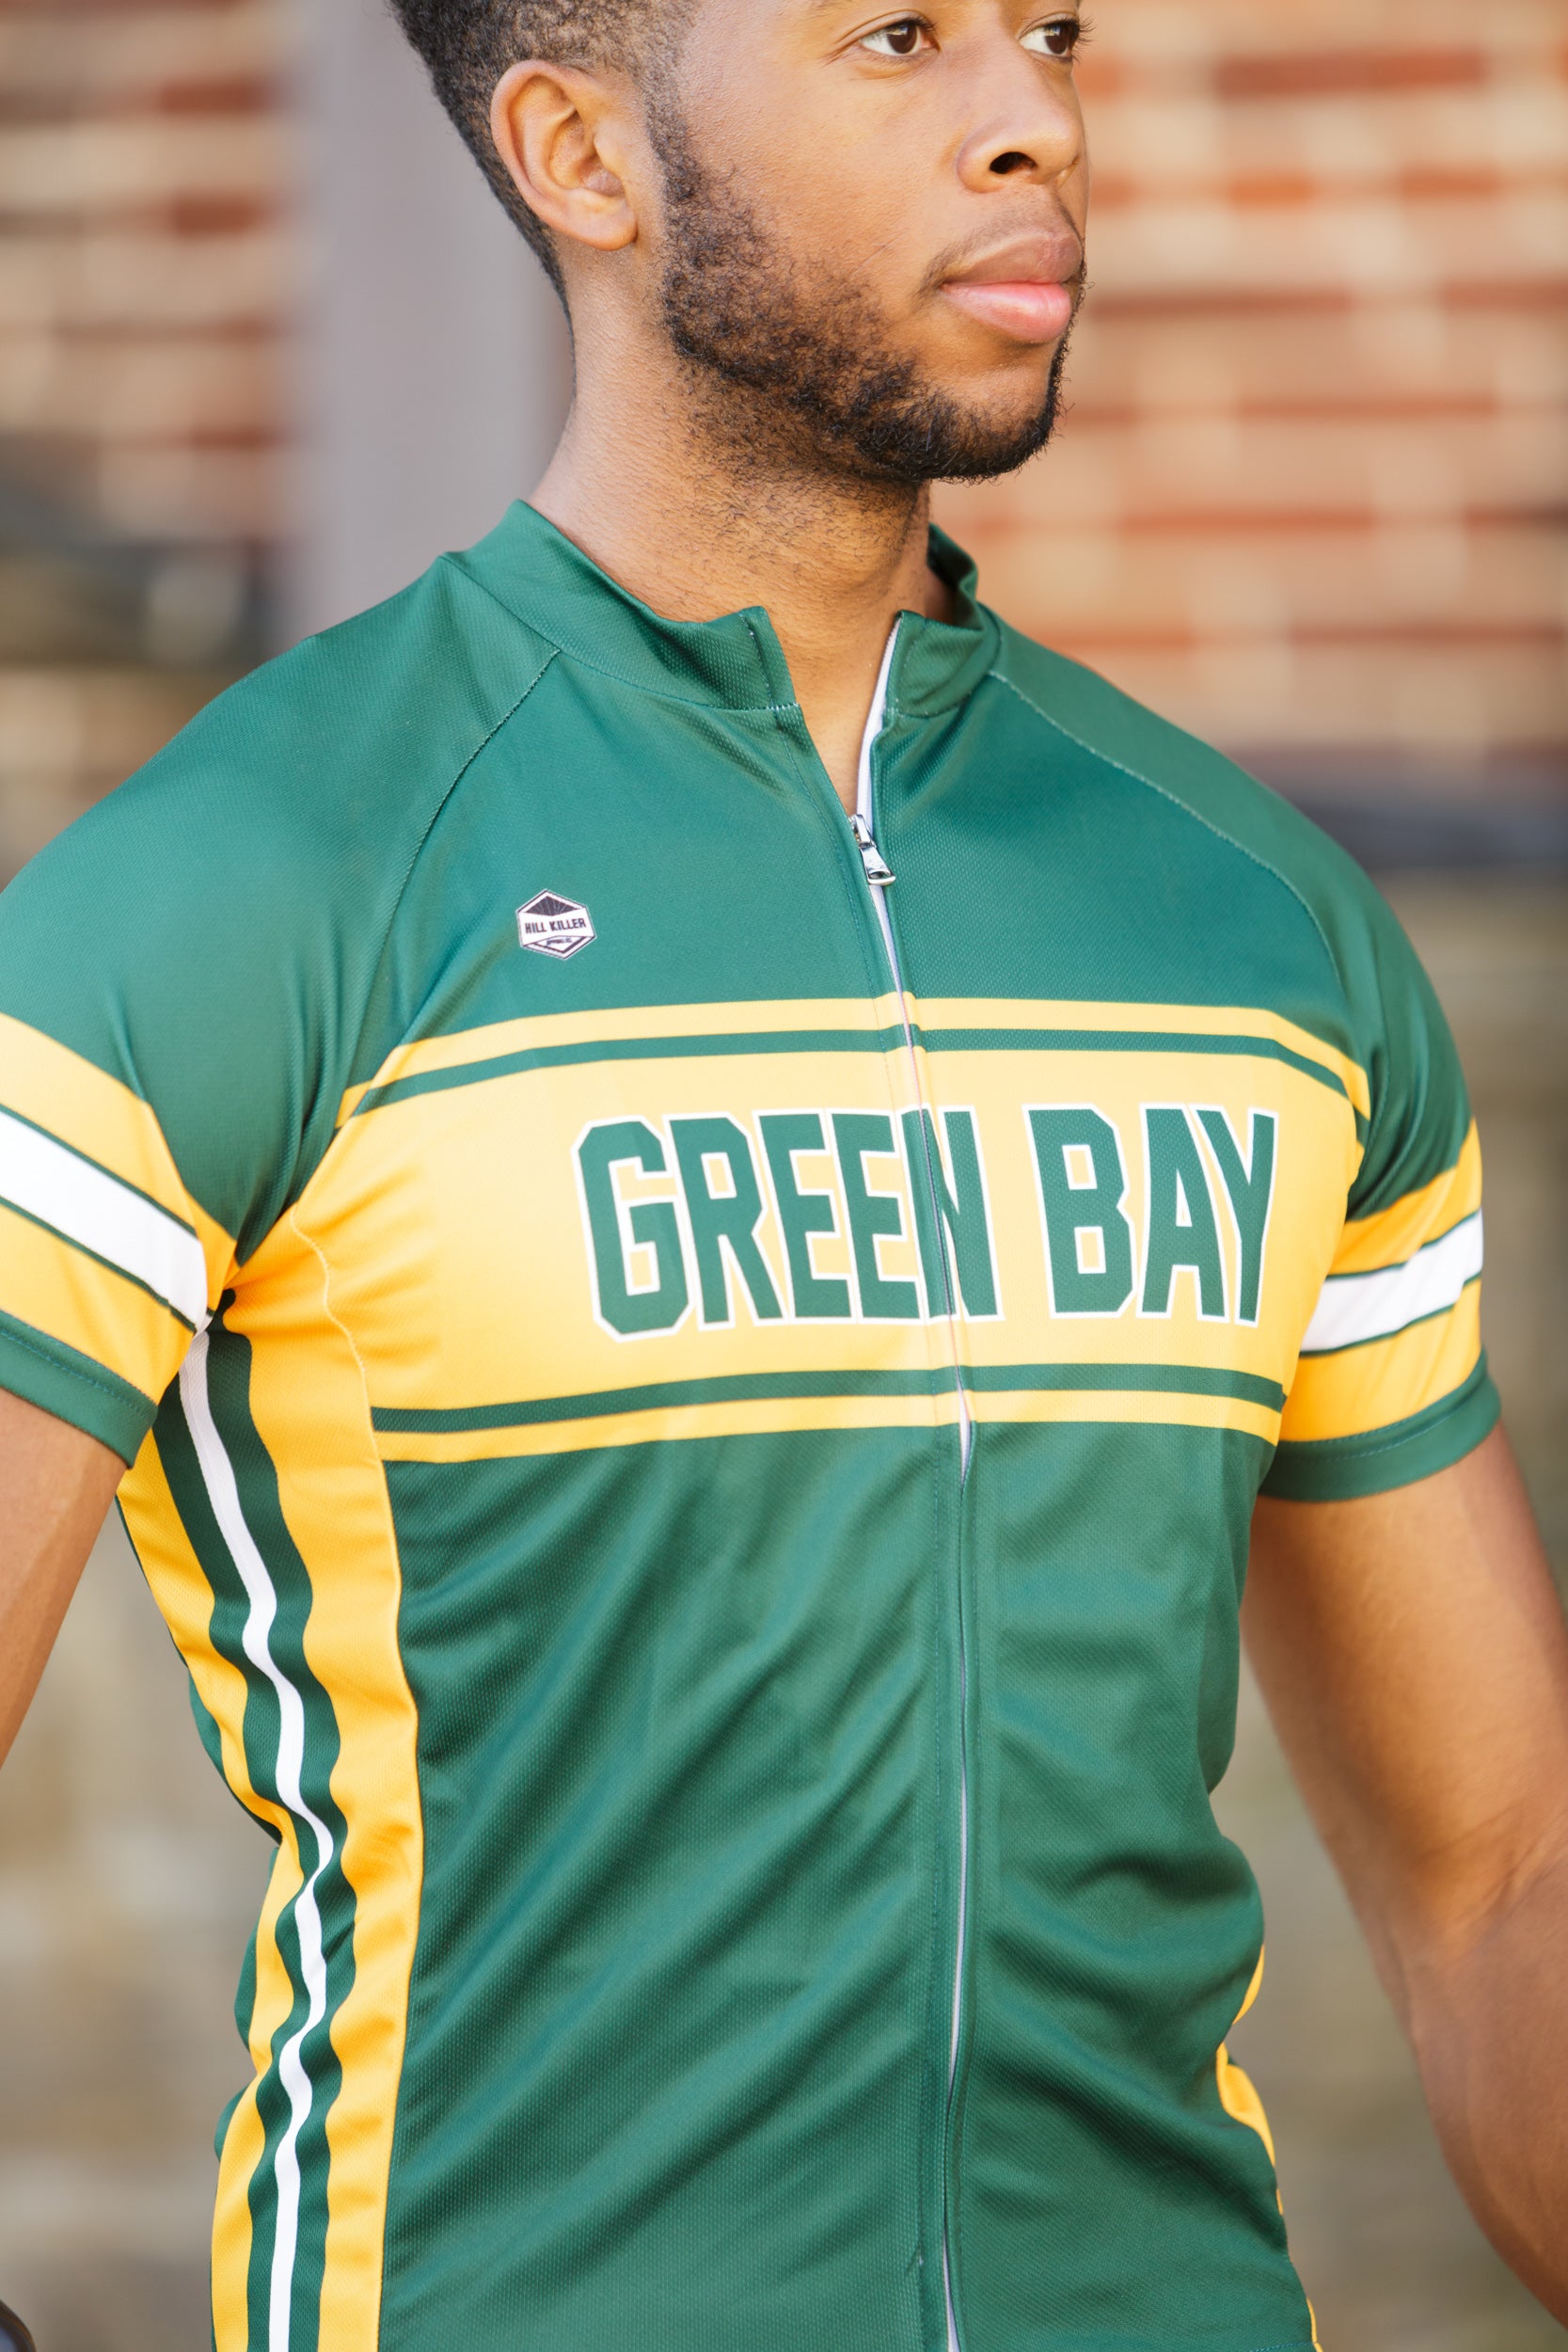 green bay packers cycling jersey